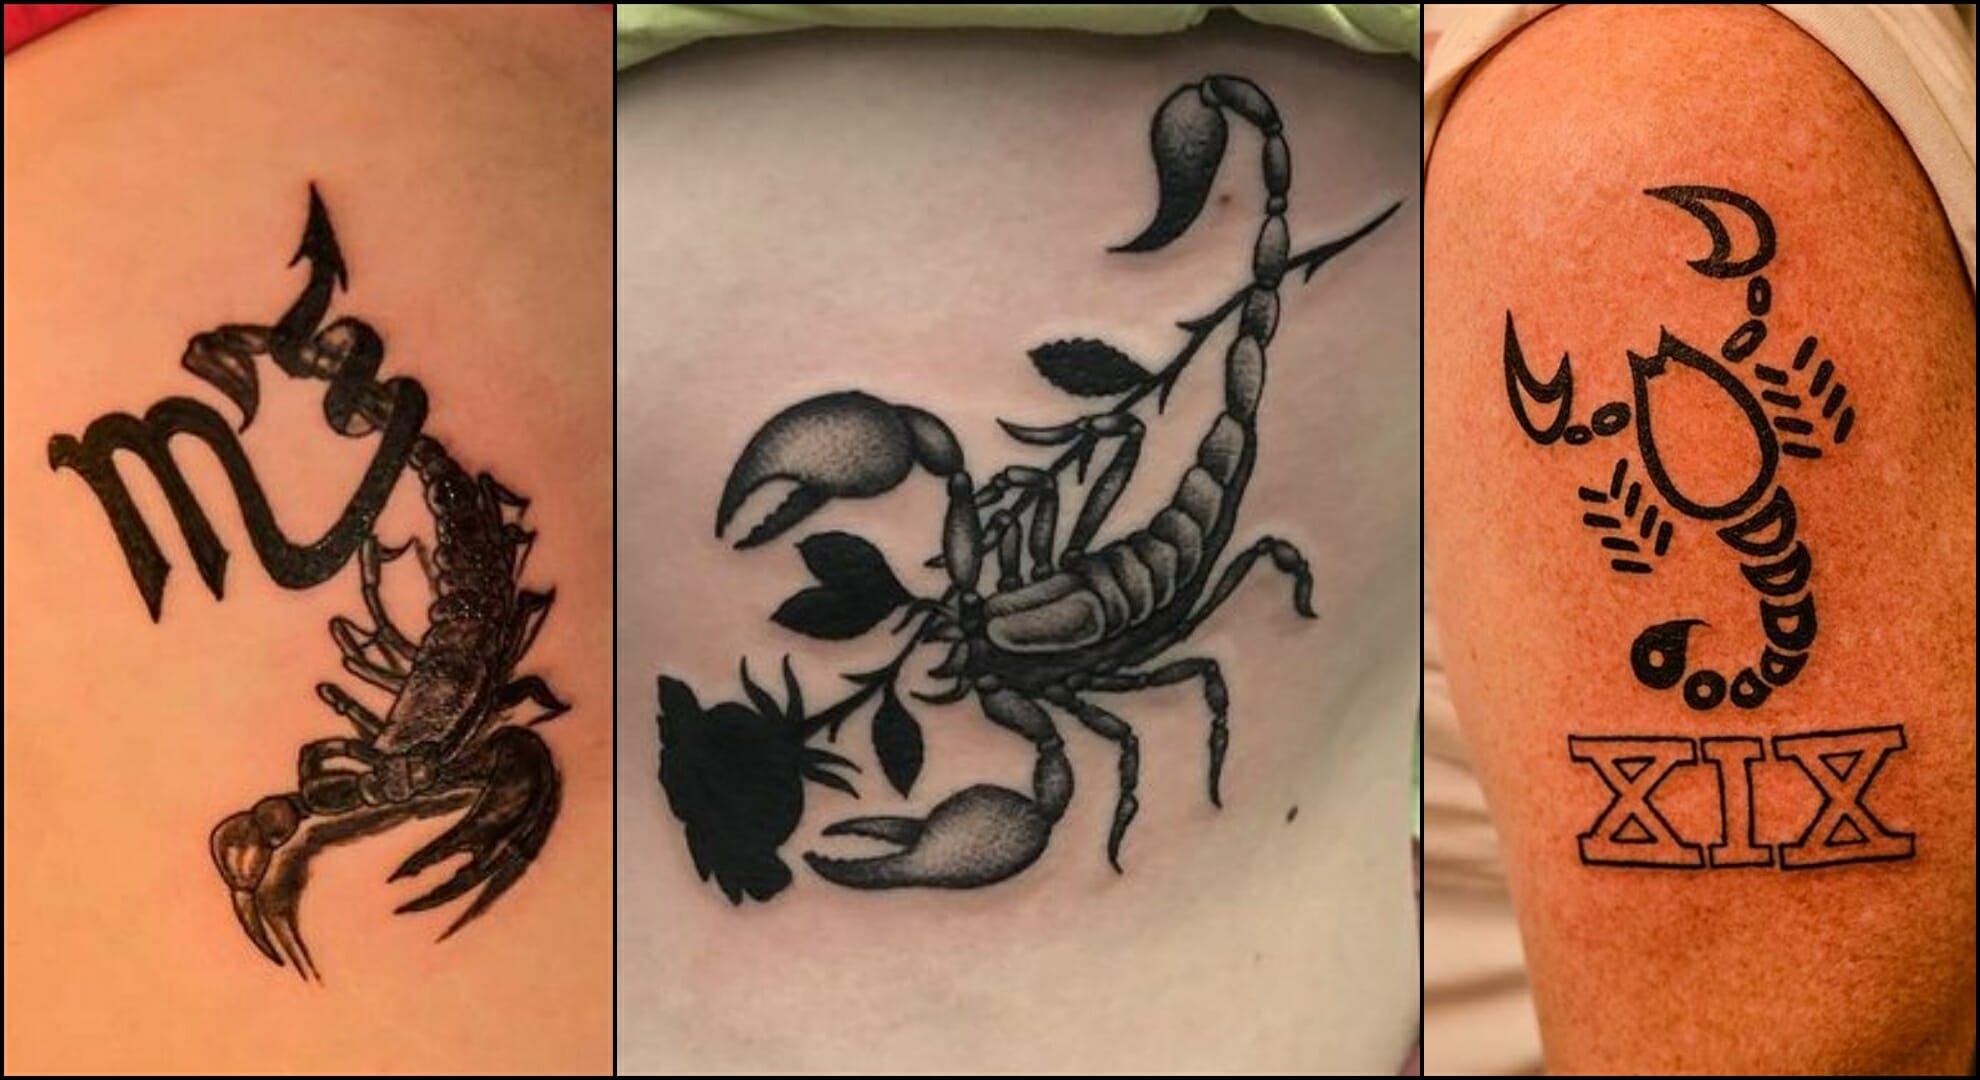 Tattoo of the zodiac sign of a scorpion 25 stylish sketches and tattoos of  a scorpion and meaning   Онлайн блог о тату IdeasTattoo